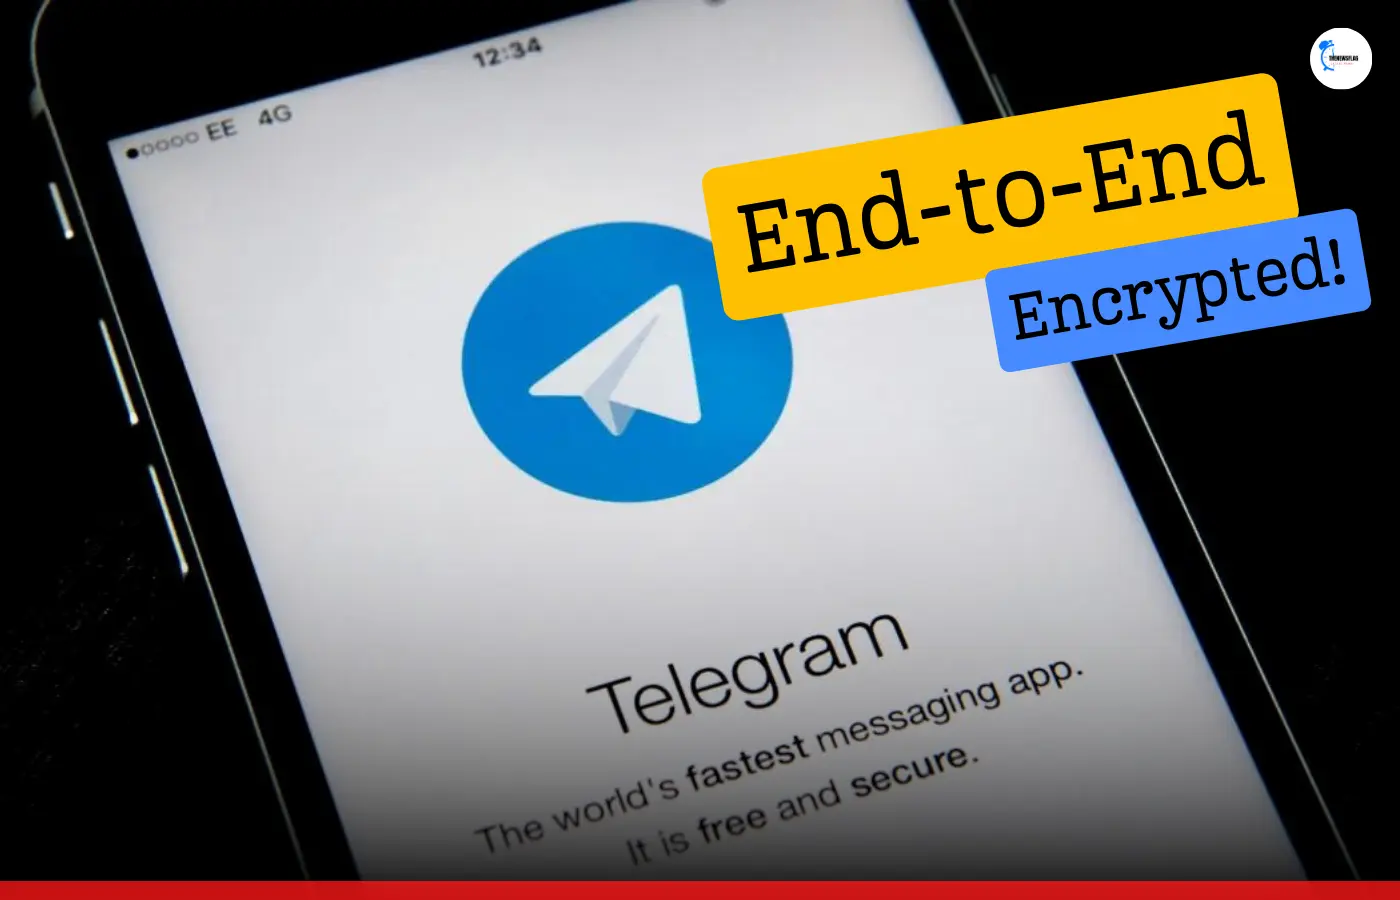 Is Telegram end-to-end encrypted?